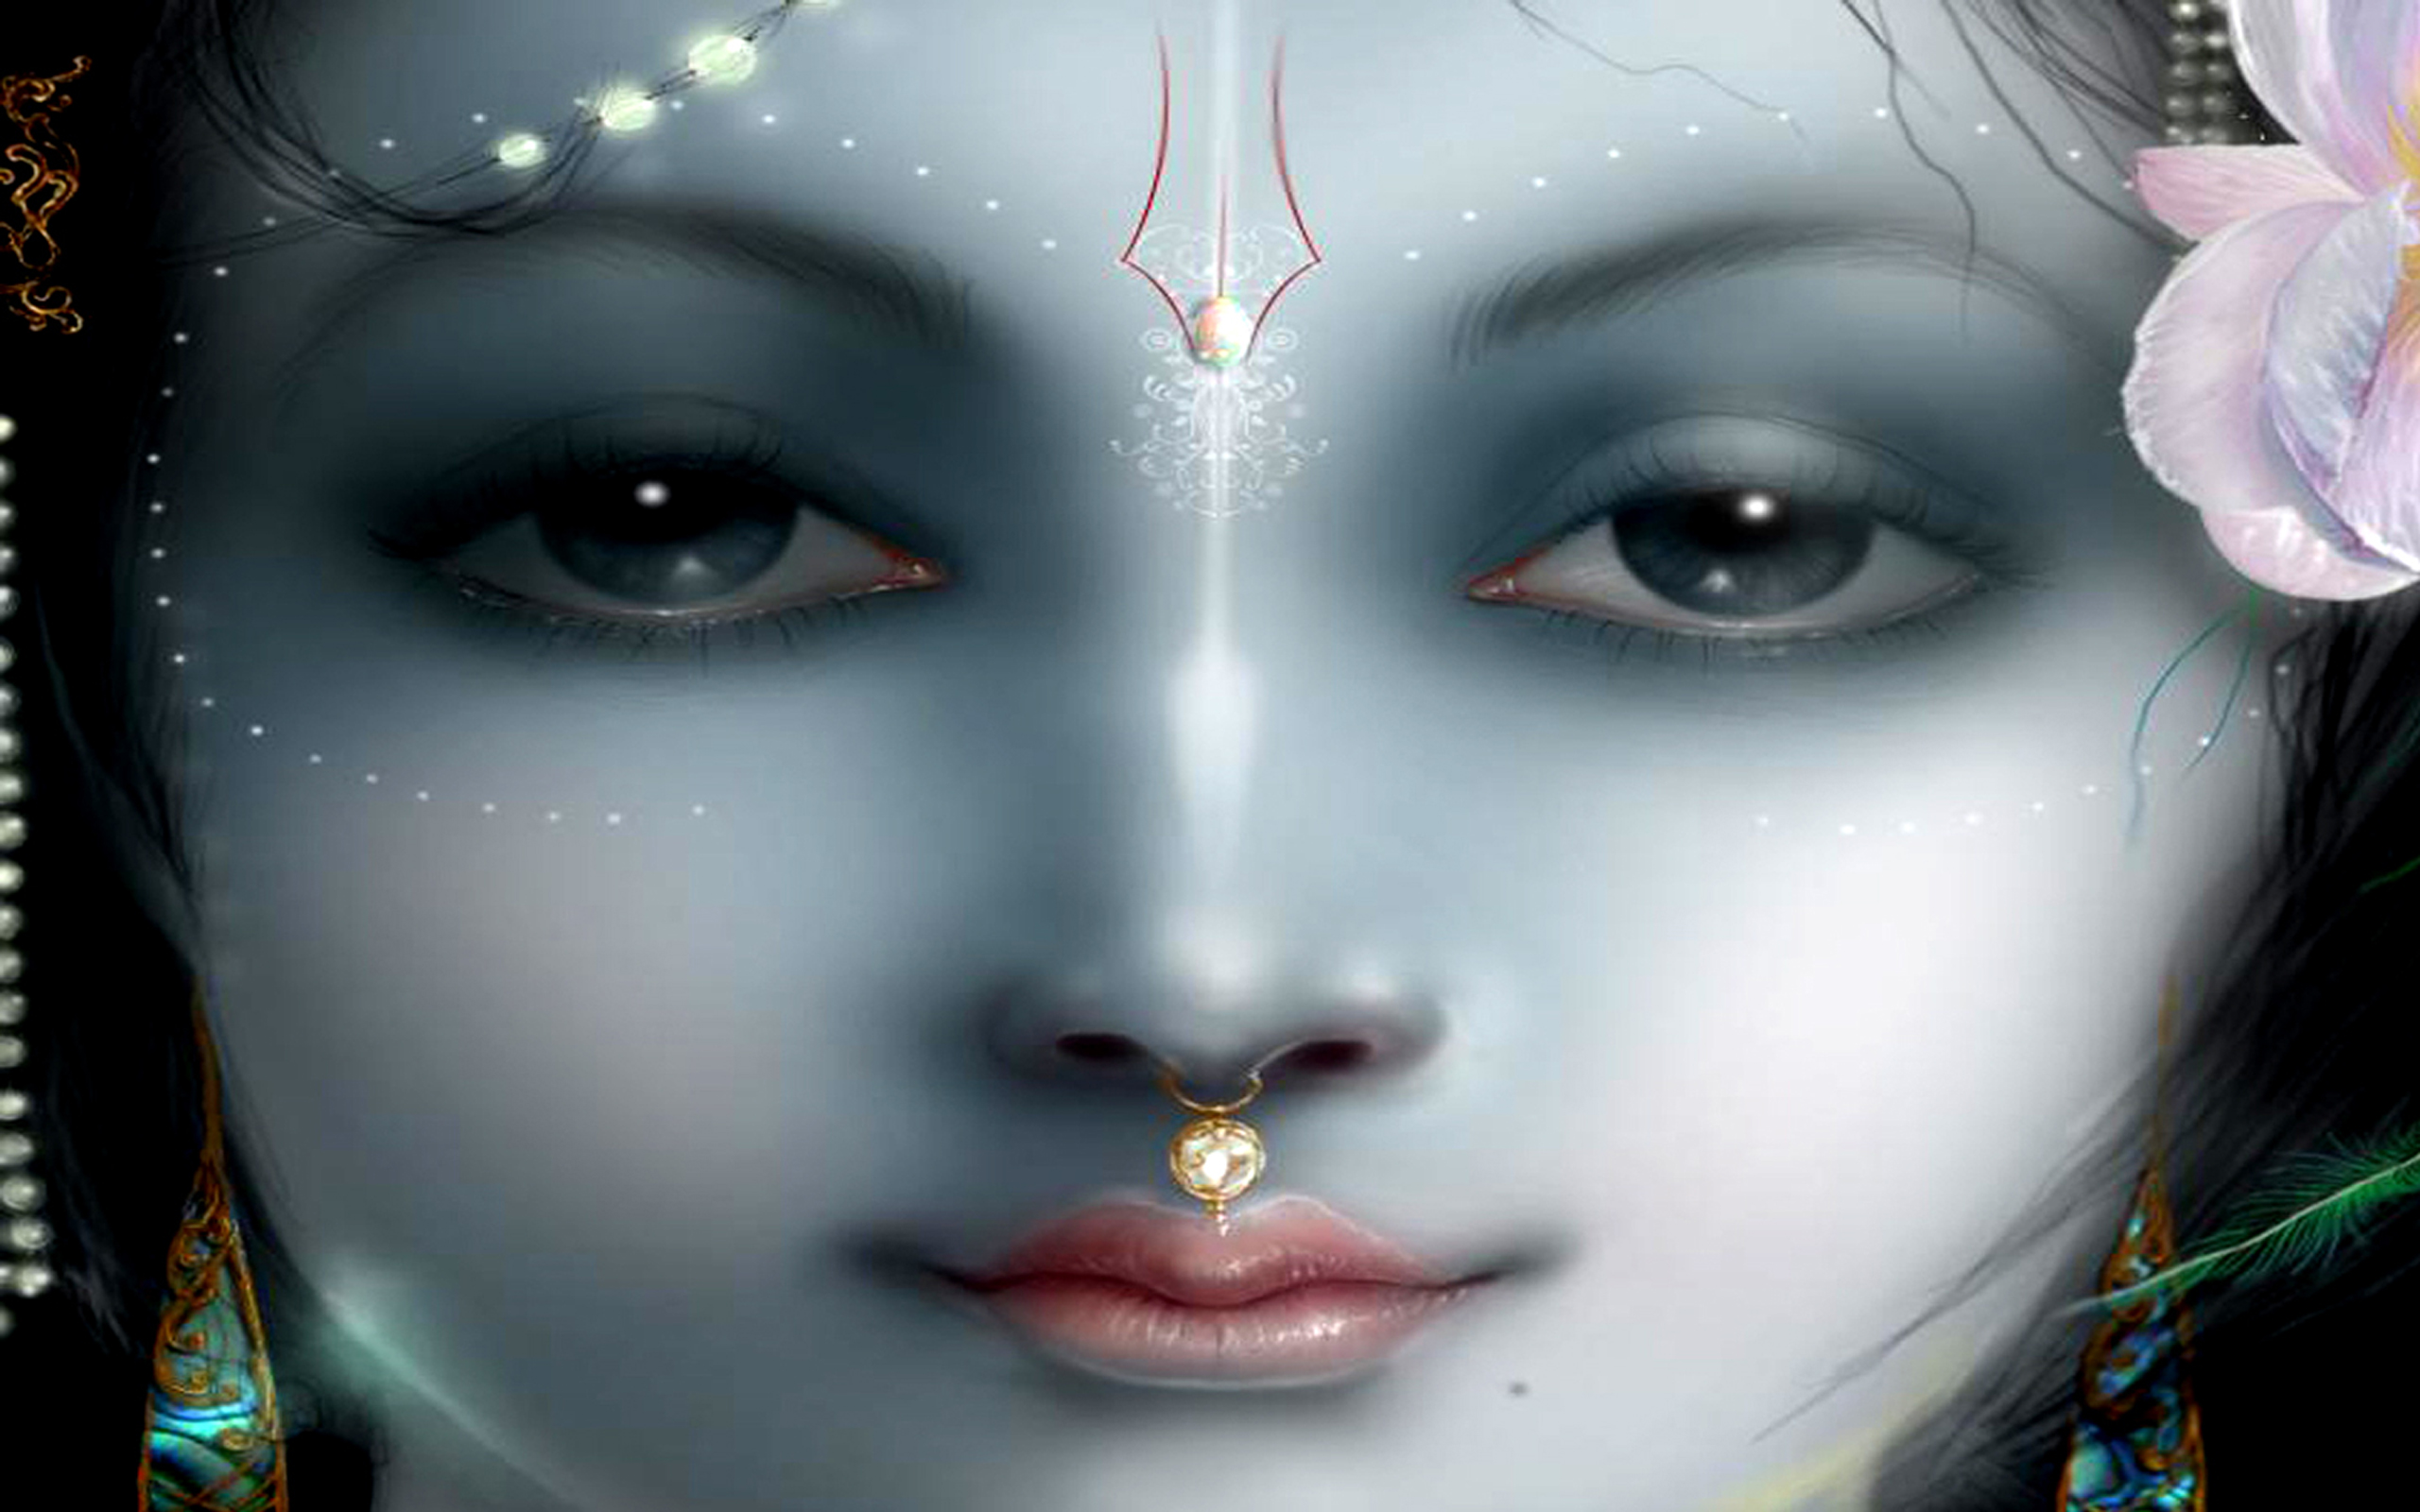 Lord Krishna, a revered deity in Hinduism, depicted in this desktop wallpaper with religious symbolism.